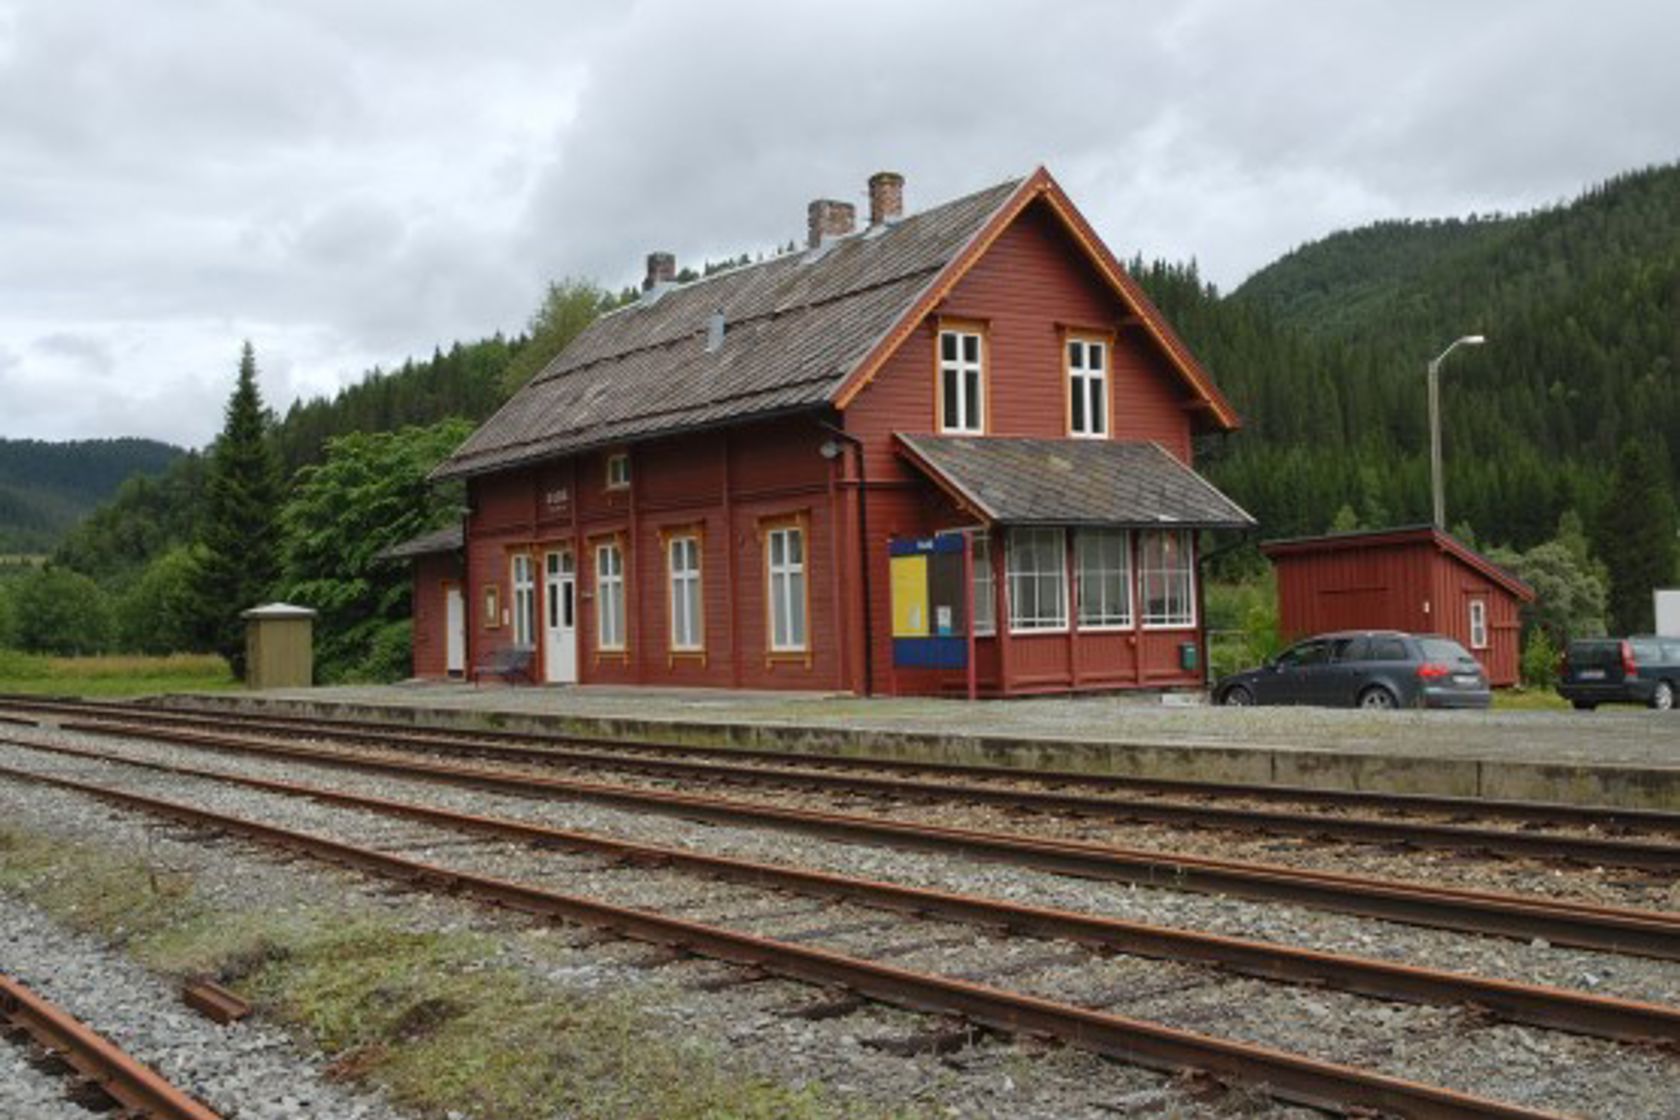 Exterior view of Gudå station